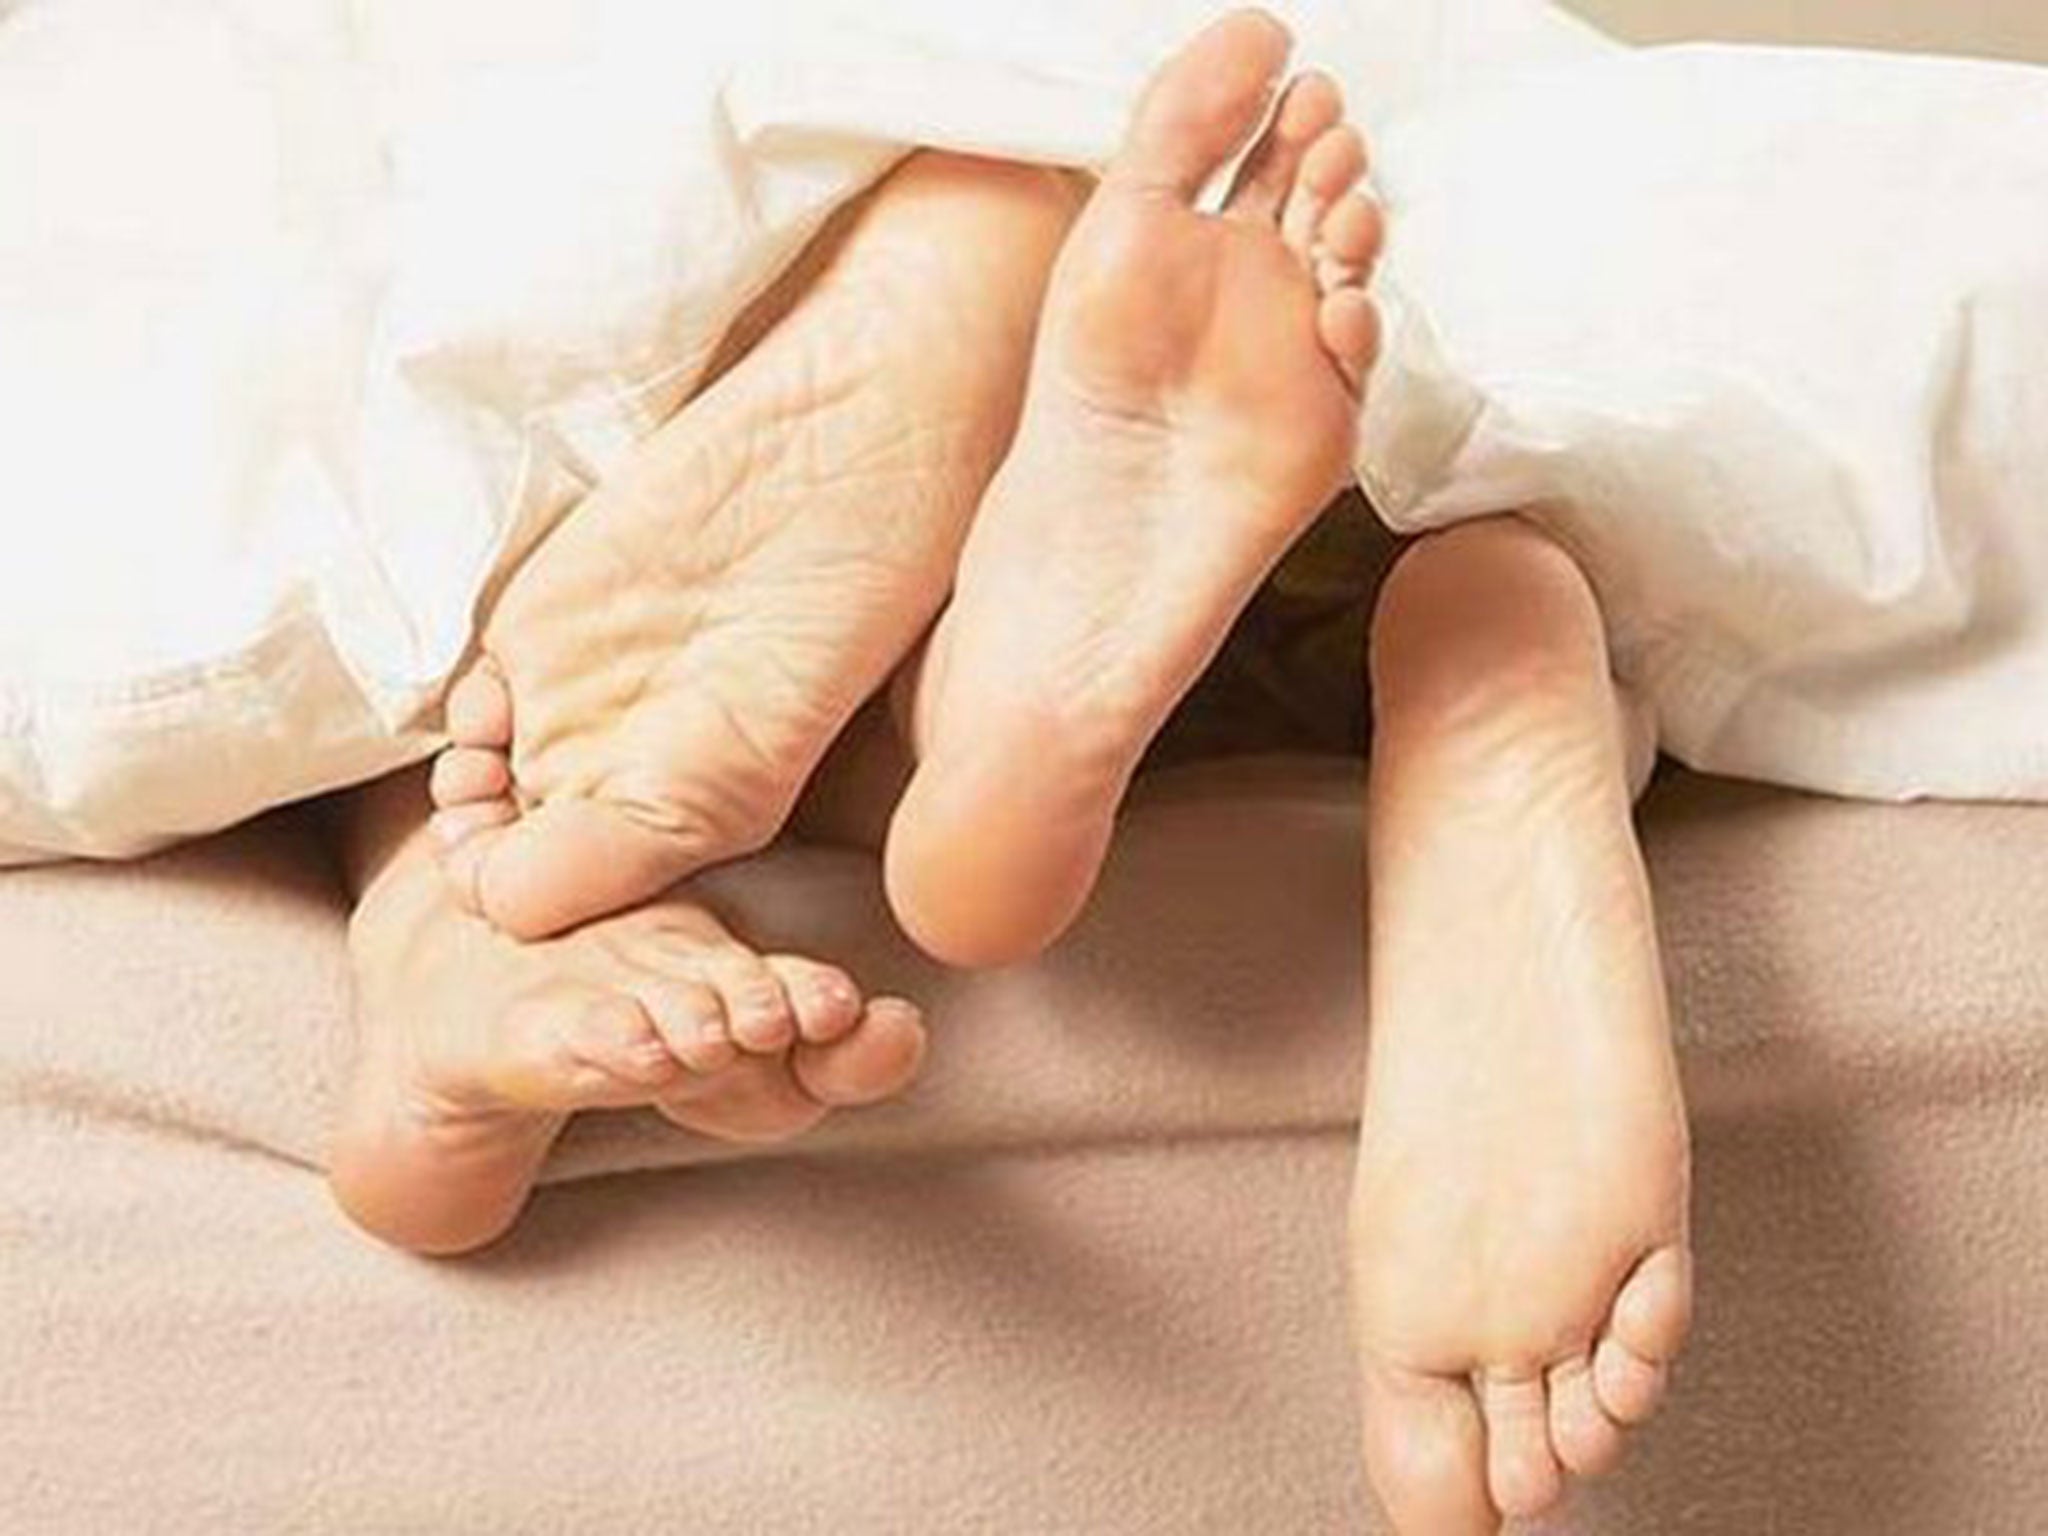 Overall, 63 per cent are satisfied with their sex life, down from 76 per cent six years ago